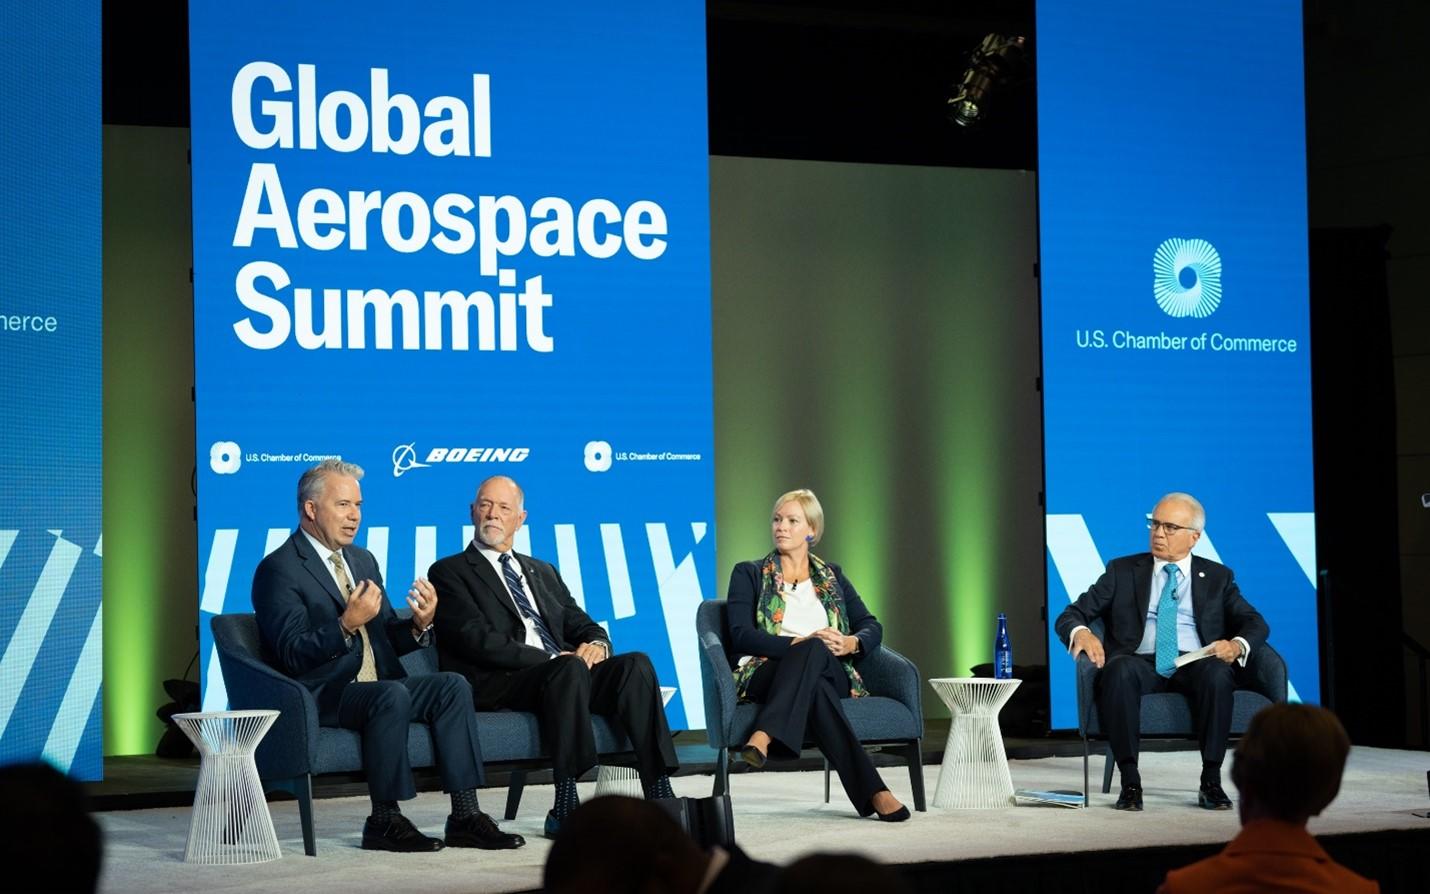 Capt. Patrick Burns (left) speaks on a panel at the U.S. Chamber of Commerce Global Aerospace Summit in September 2022.